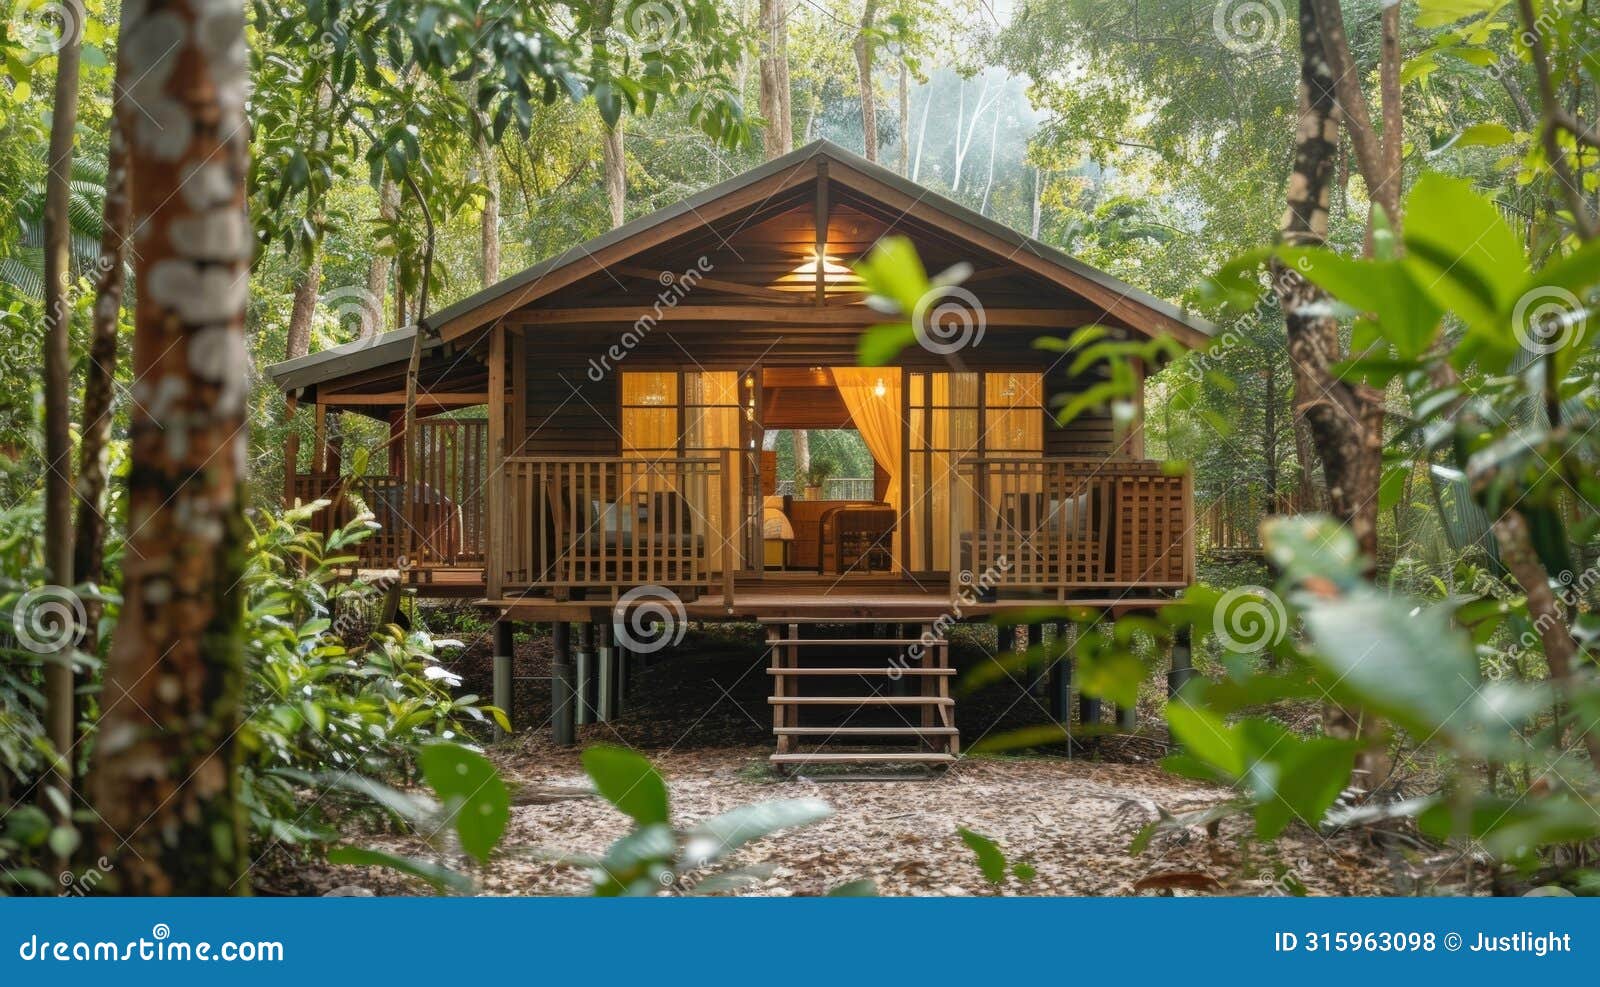 immerse yourself in the tranquility of nature as you drift off to sleep with the gentle rocking of the bungalow and the